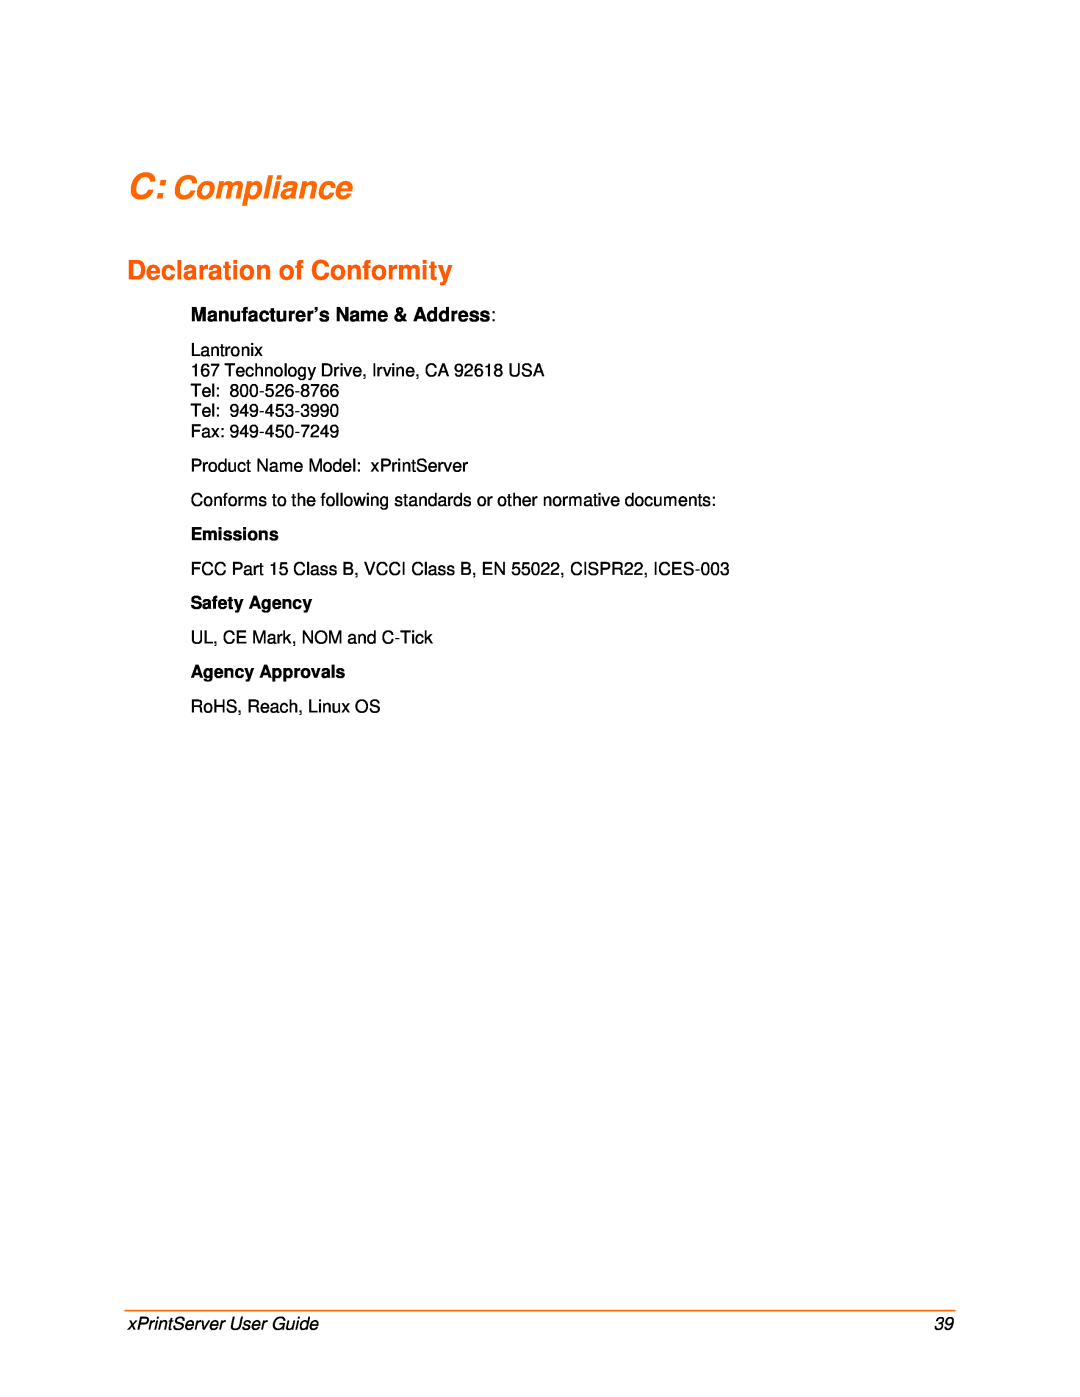 Lantronix 900-603 manual C Compliance, Declaration of Conformity, Emissions, Safety Agency, Agency Approvals 